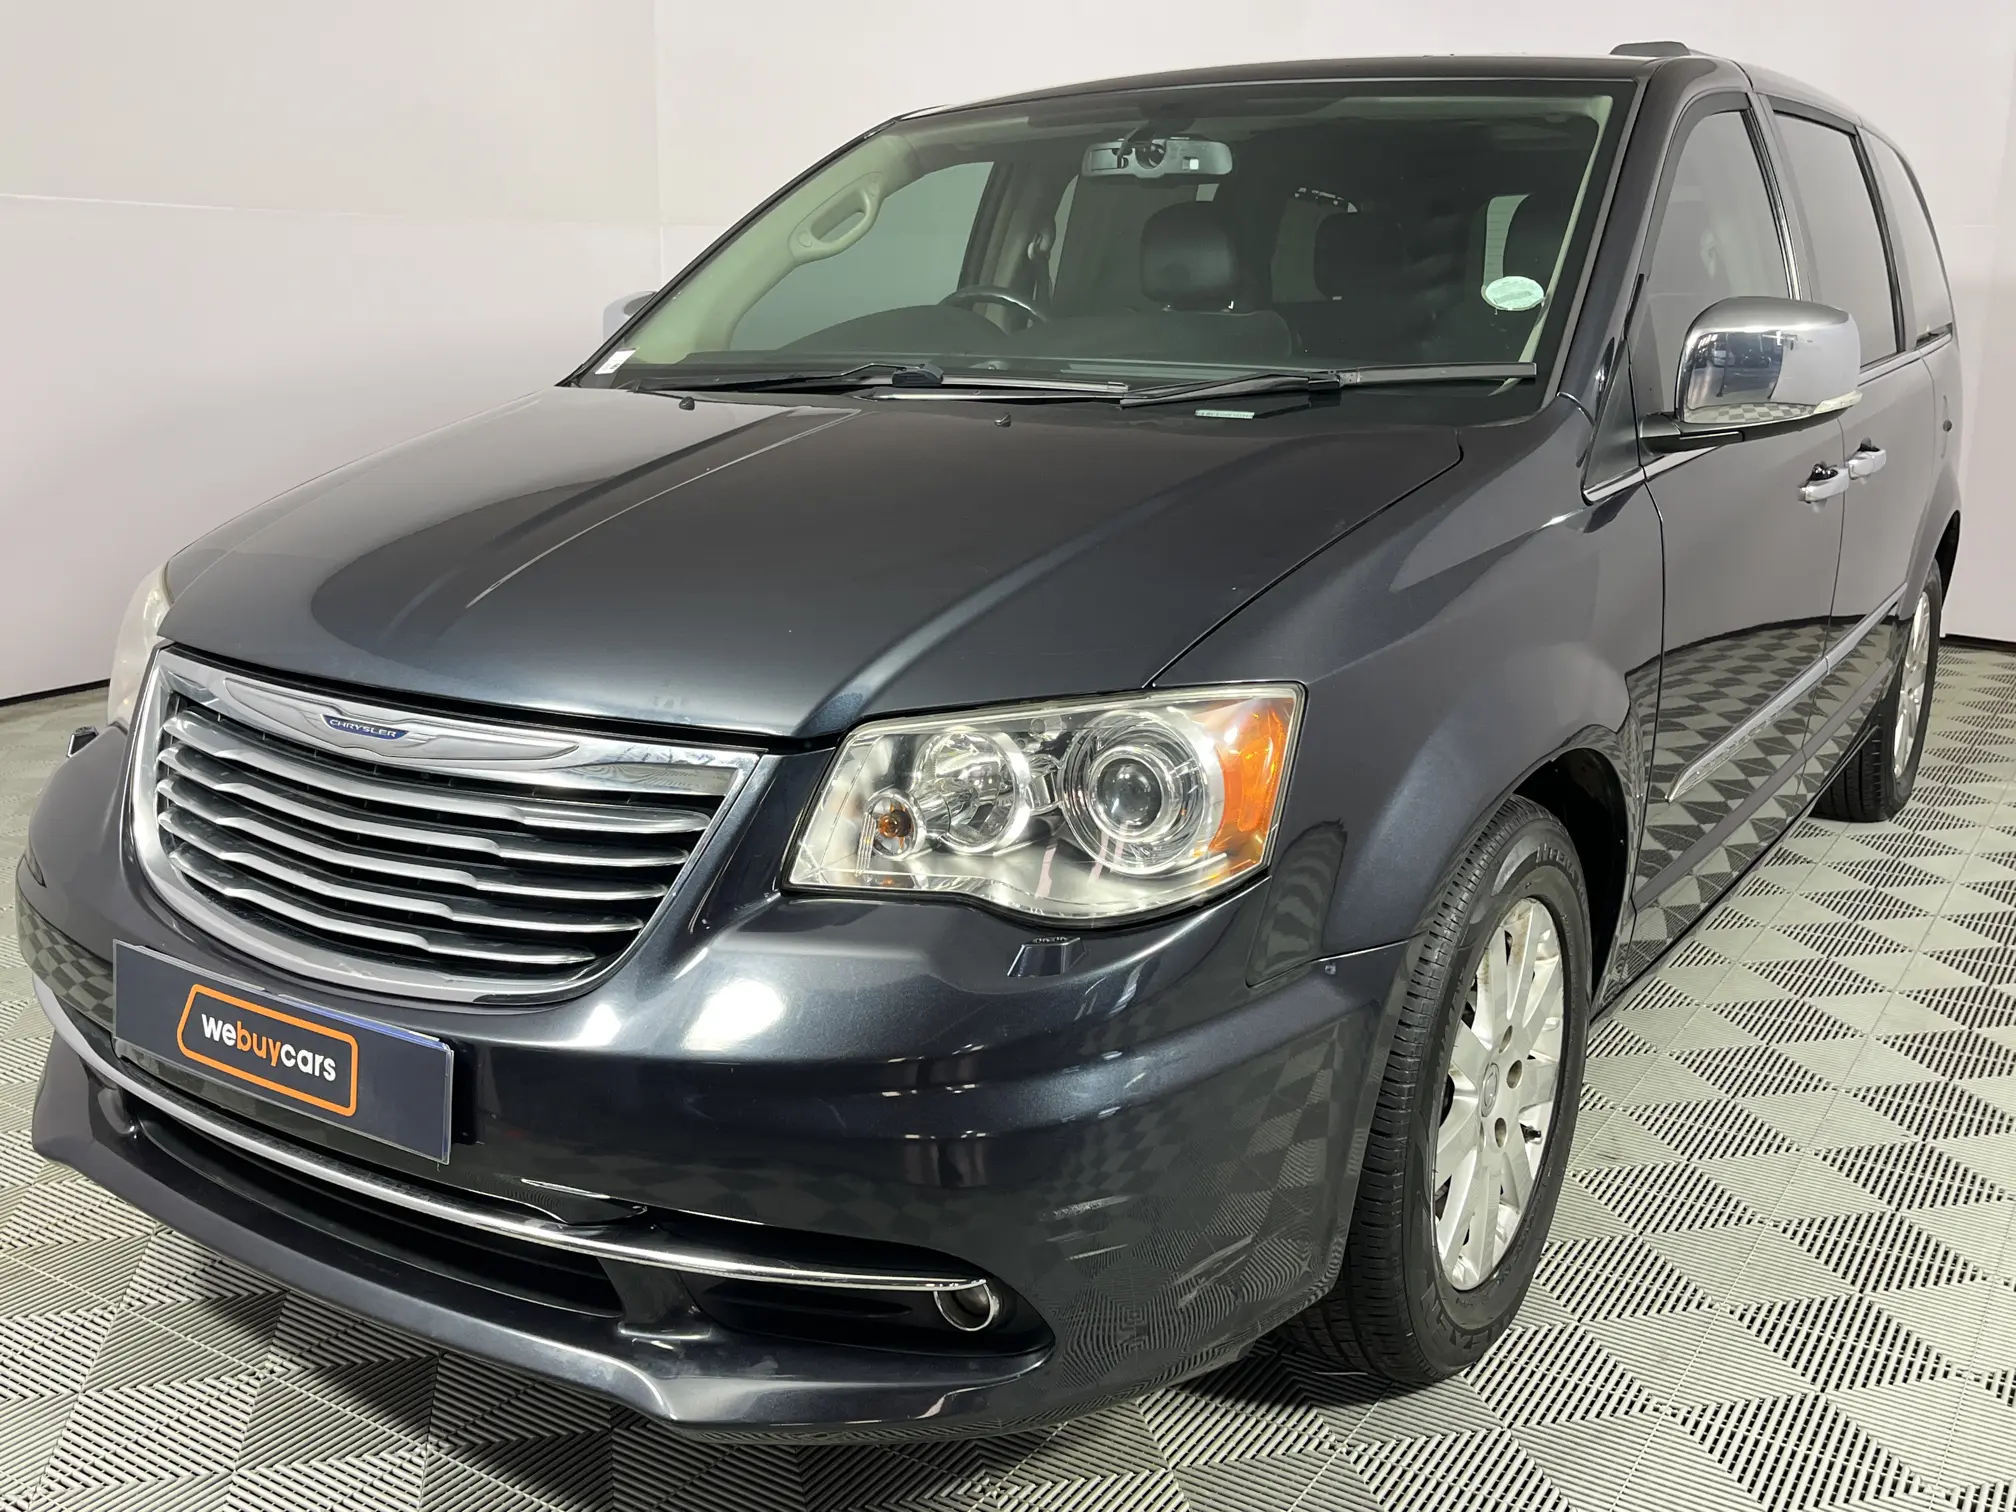 2013 Chrysler Grand Voyager 2.8 Limited Auto